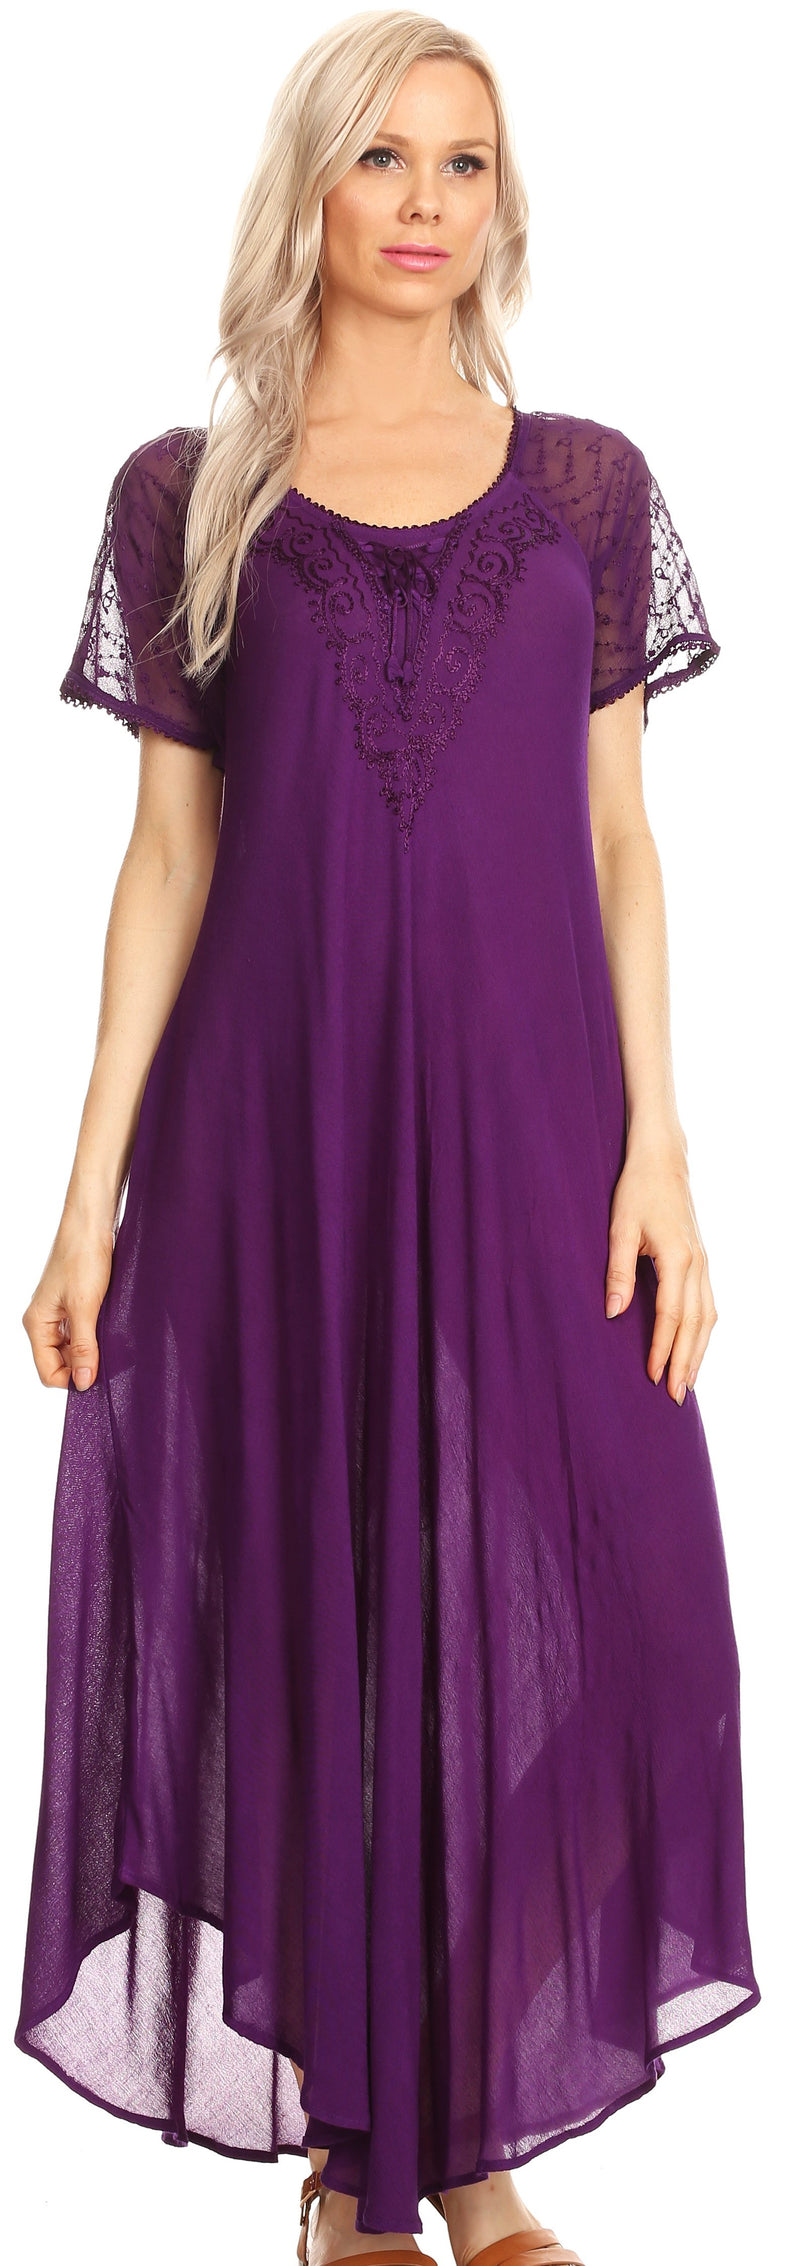 Sakkas Hayden Embroidered Lace-Up Caftan Dress / Cover Up with Eyelet Sleeves